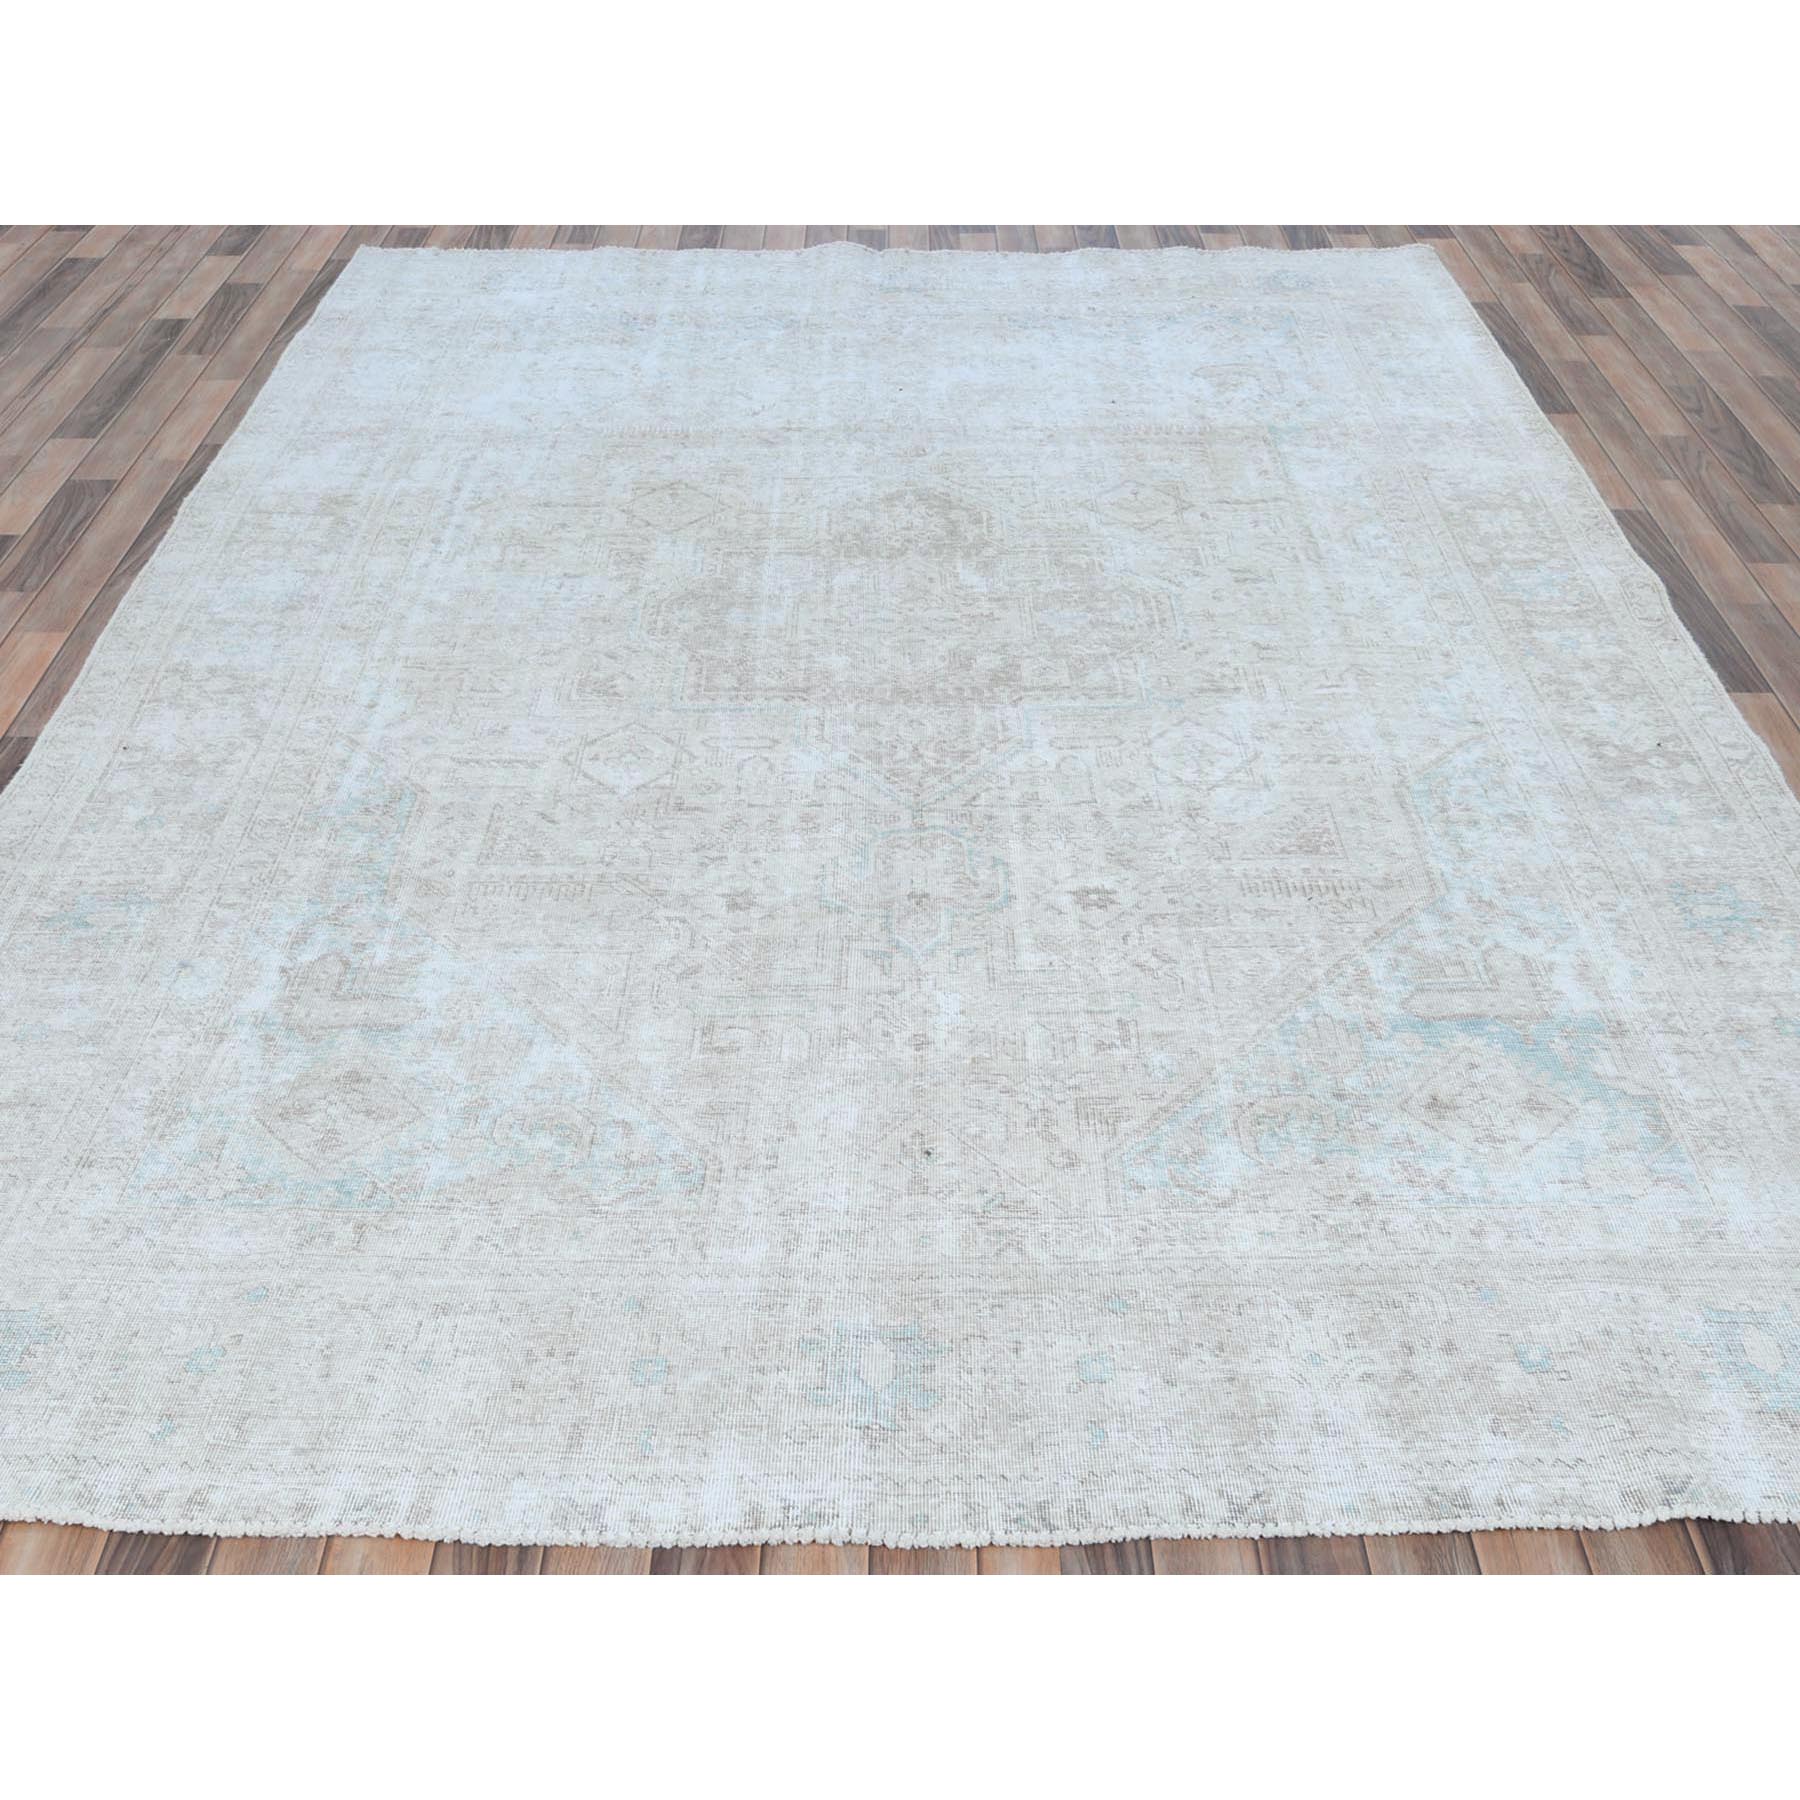 8'1"x10'9" Beige Shabby Chic Vintage Persian Tabriz Hand Woven Worn Wool, Cropped Thin, Distressed Look Oriental Rug 